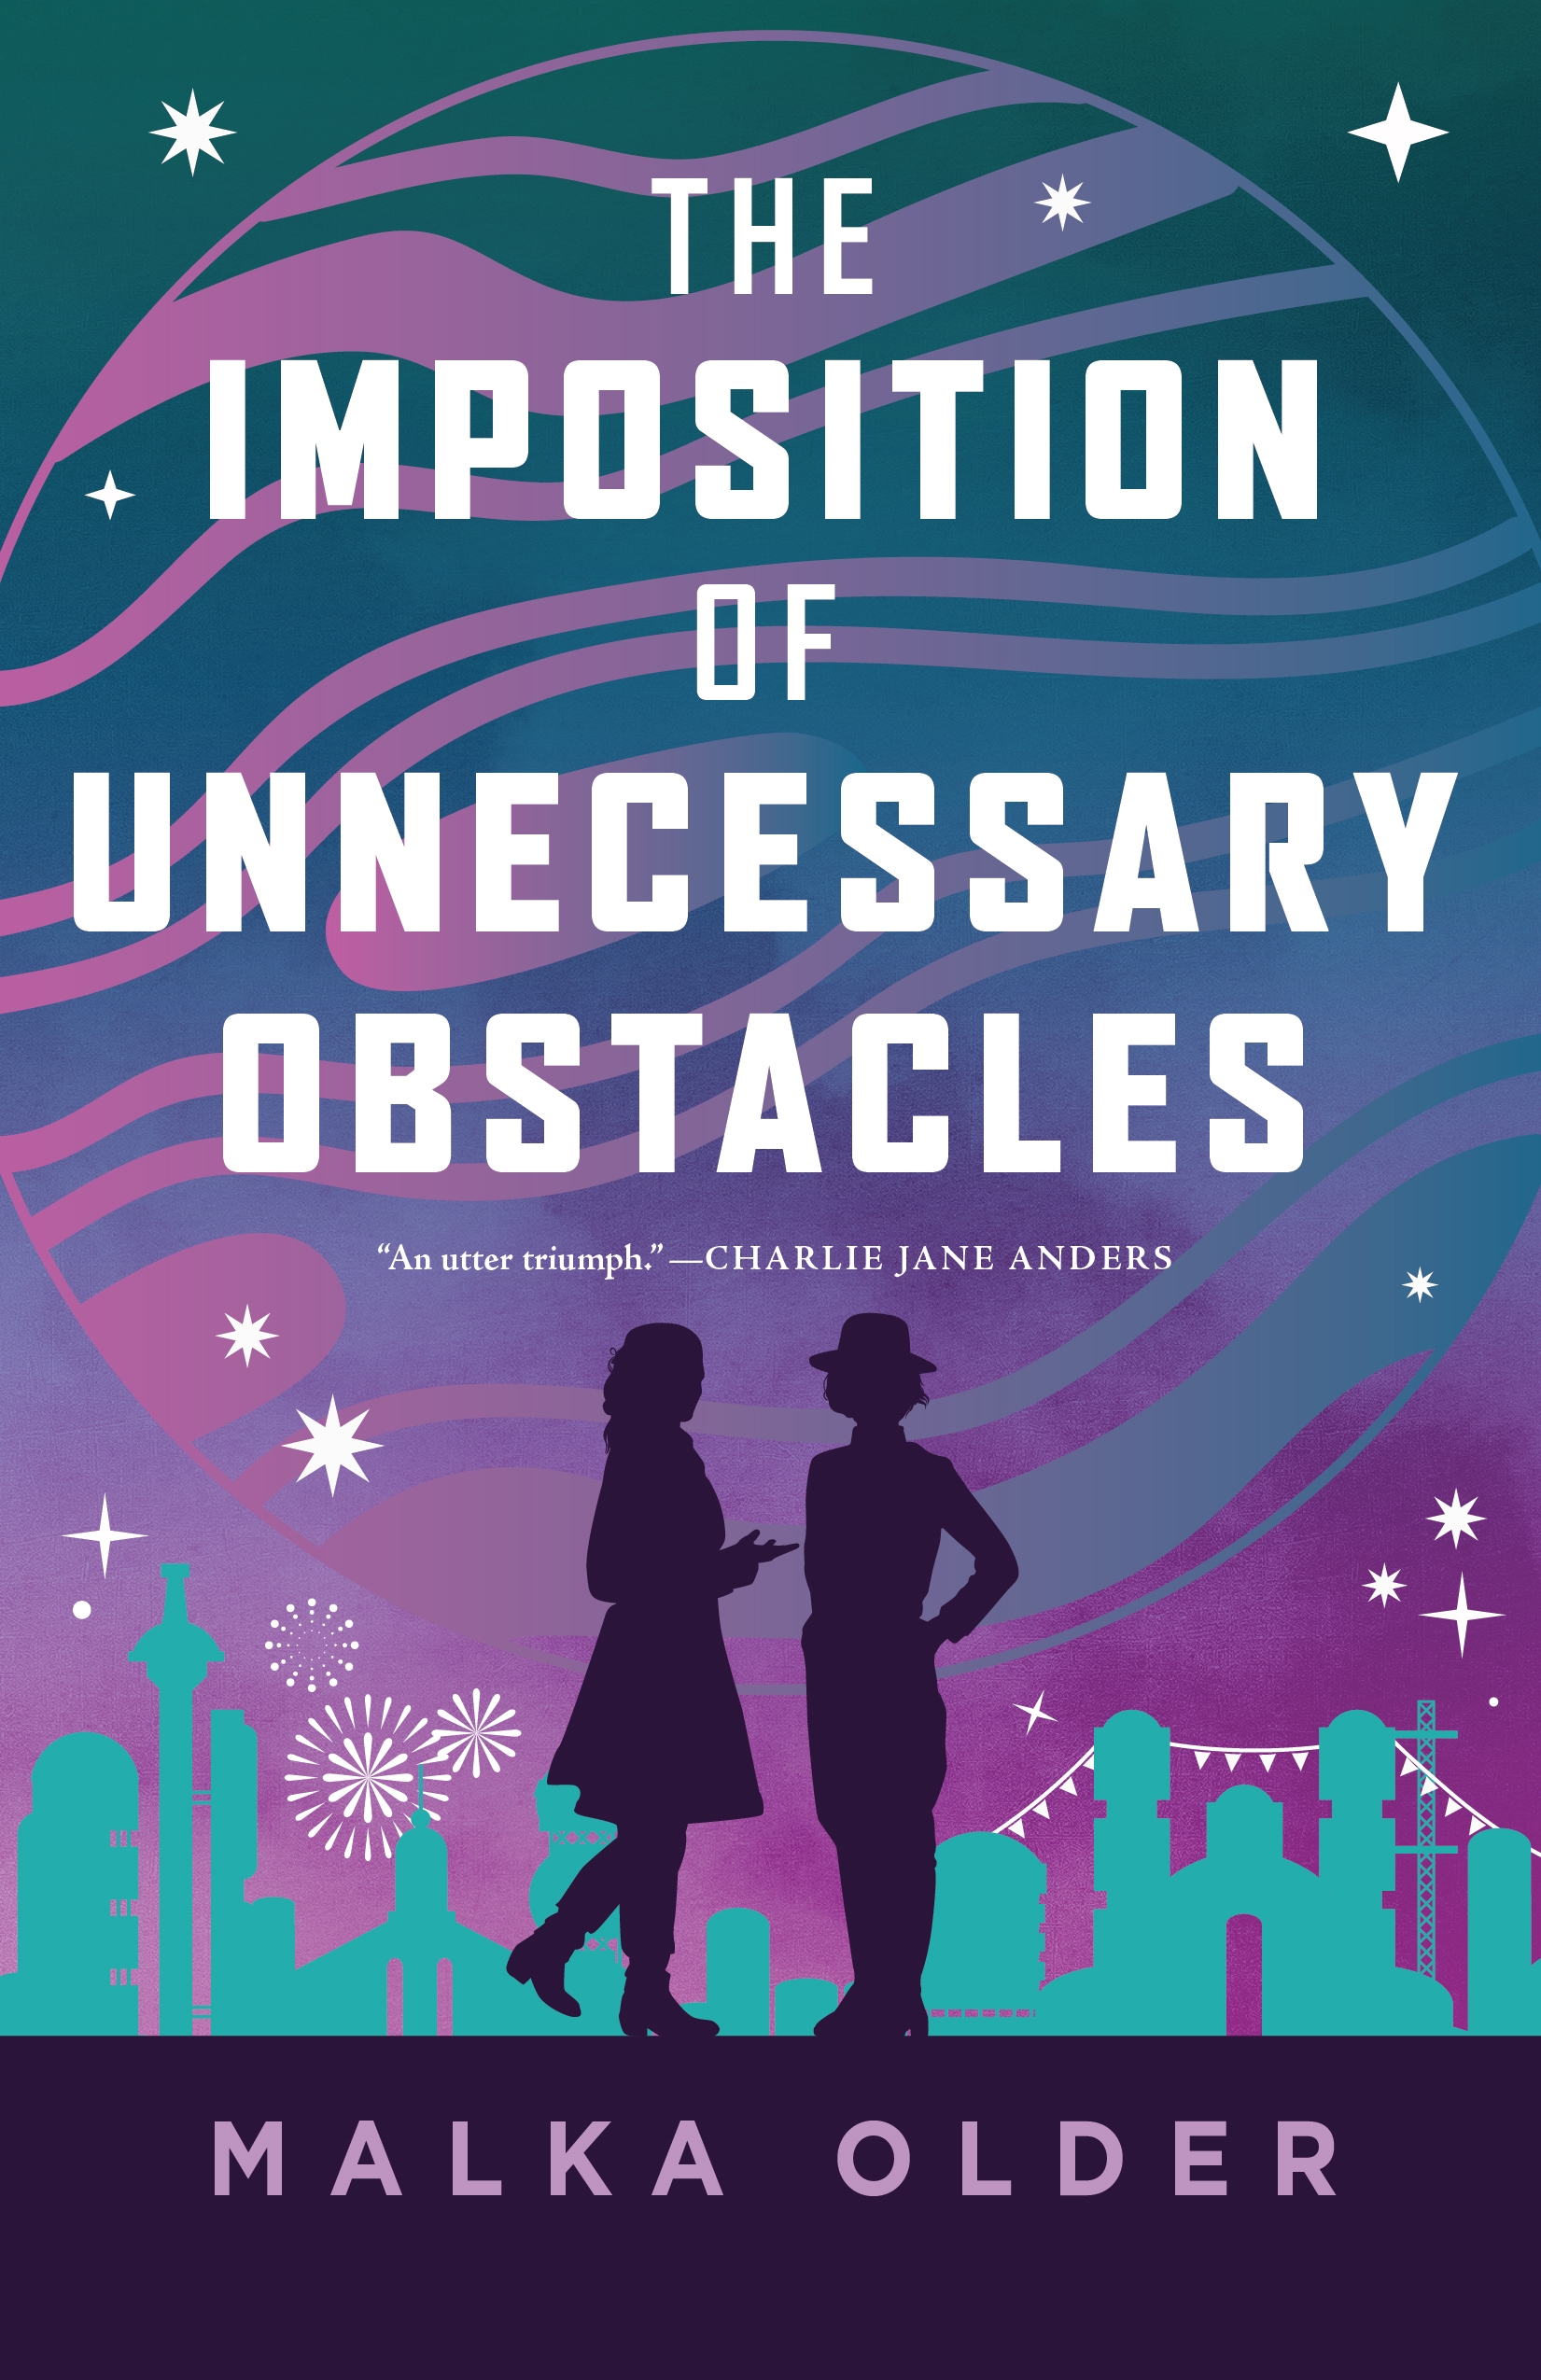 The Imposition of Unnecessary Obstacles by Malka Older